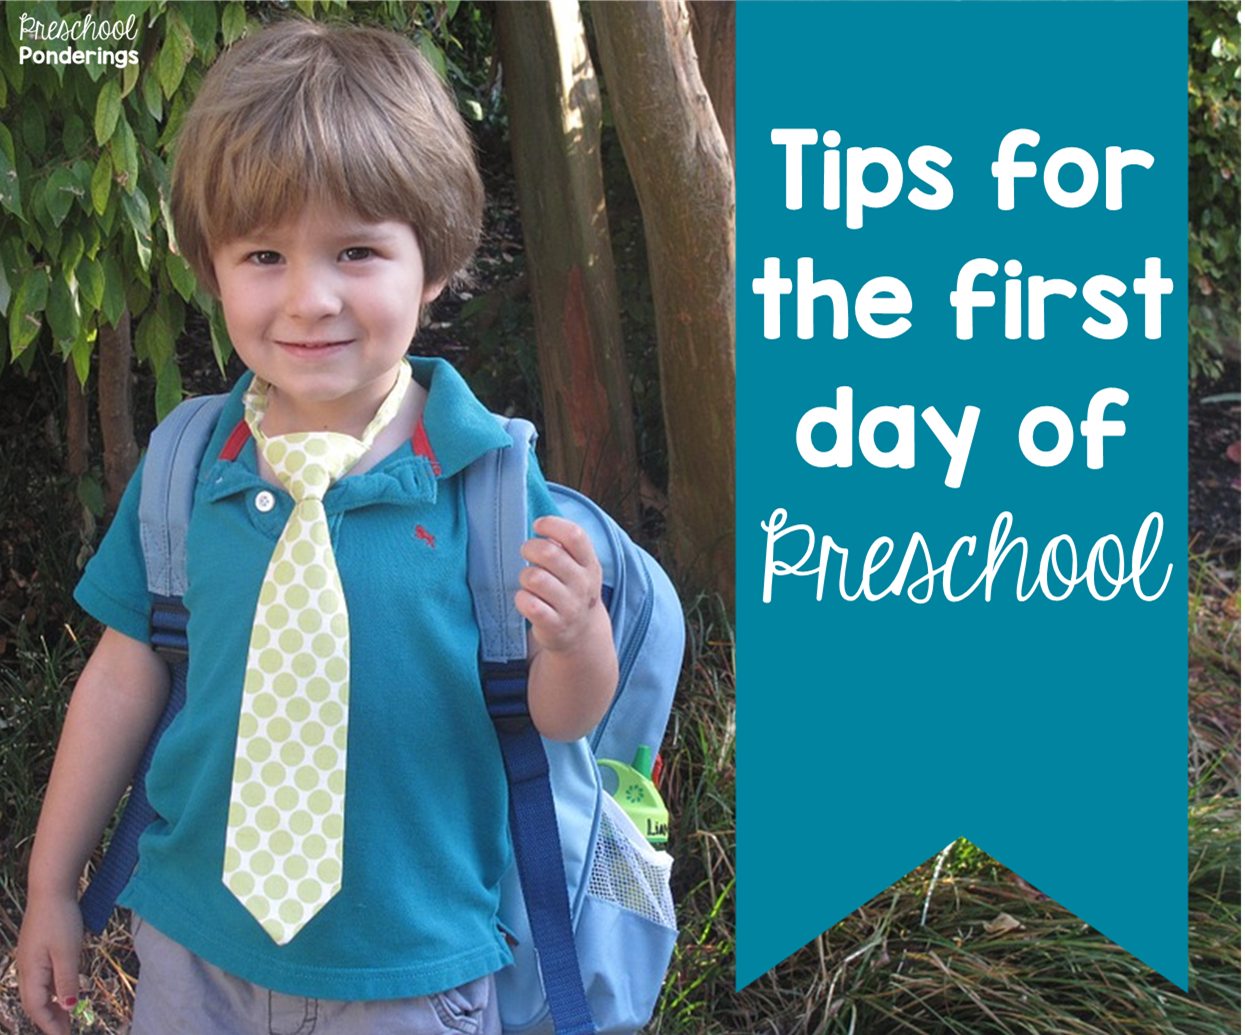 preschool-ponderings-tips-for-the-first-day-of-preschool